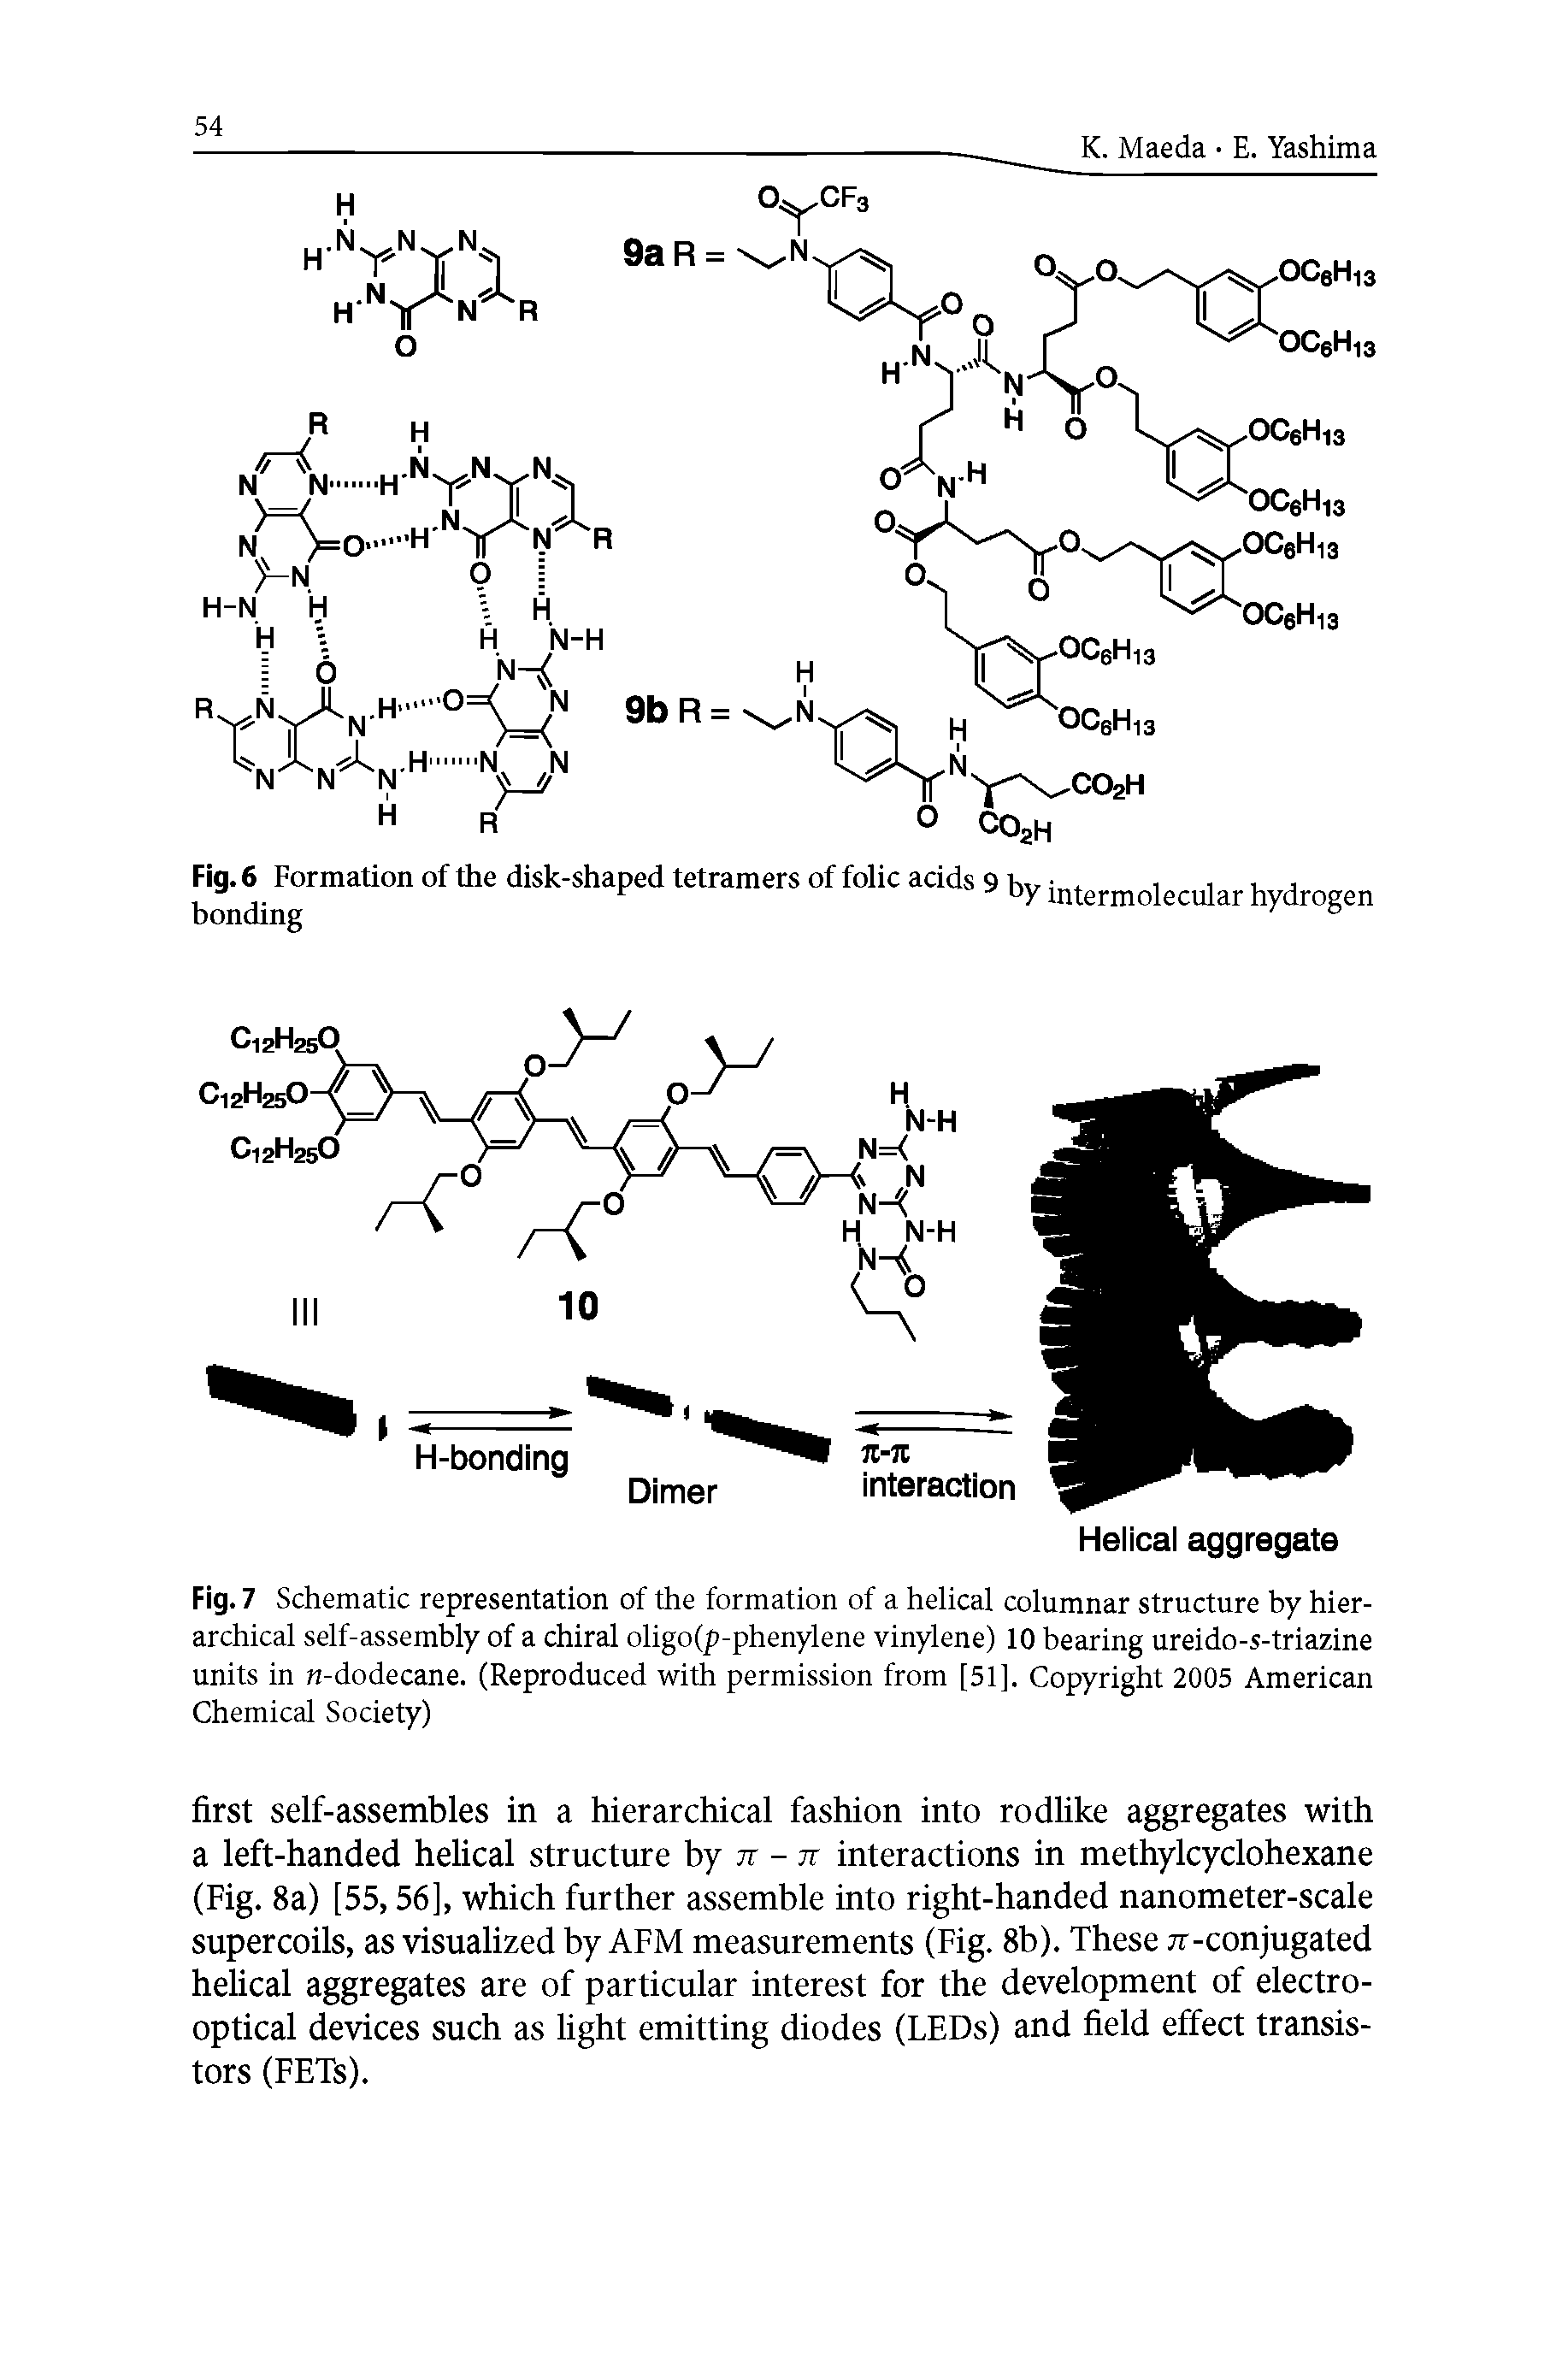 Fig. 7 Schematic representation of the formation of a helical columnar structure by hierarchical self-assembly of a chiral oligo(p-phenylene vinylene) 10 bearing ureido-s-triazine units in M-dodecane. (Reproduced with permission from [51]. Copyright 2005 American Chemical Society)...